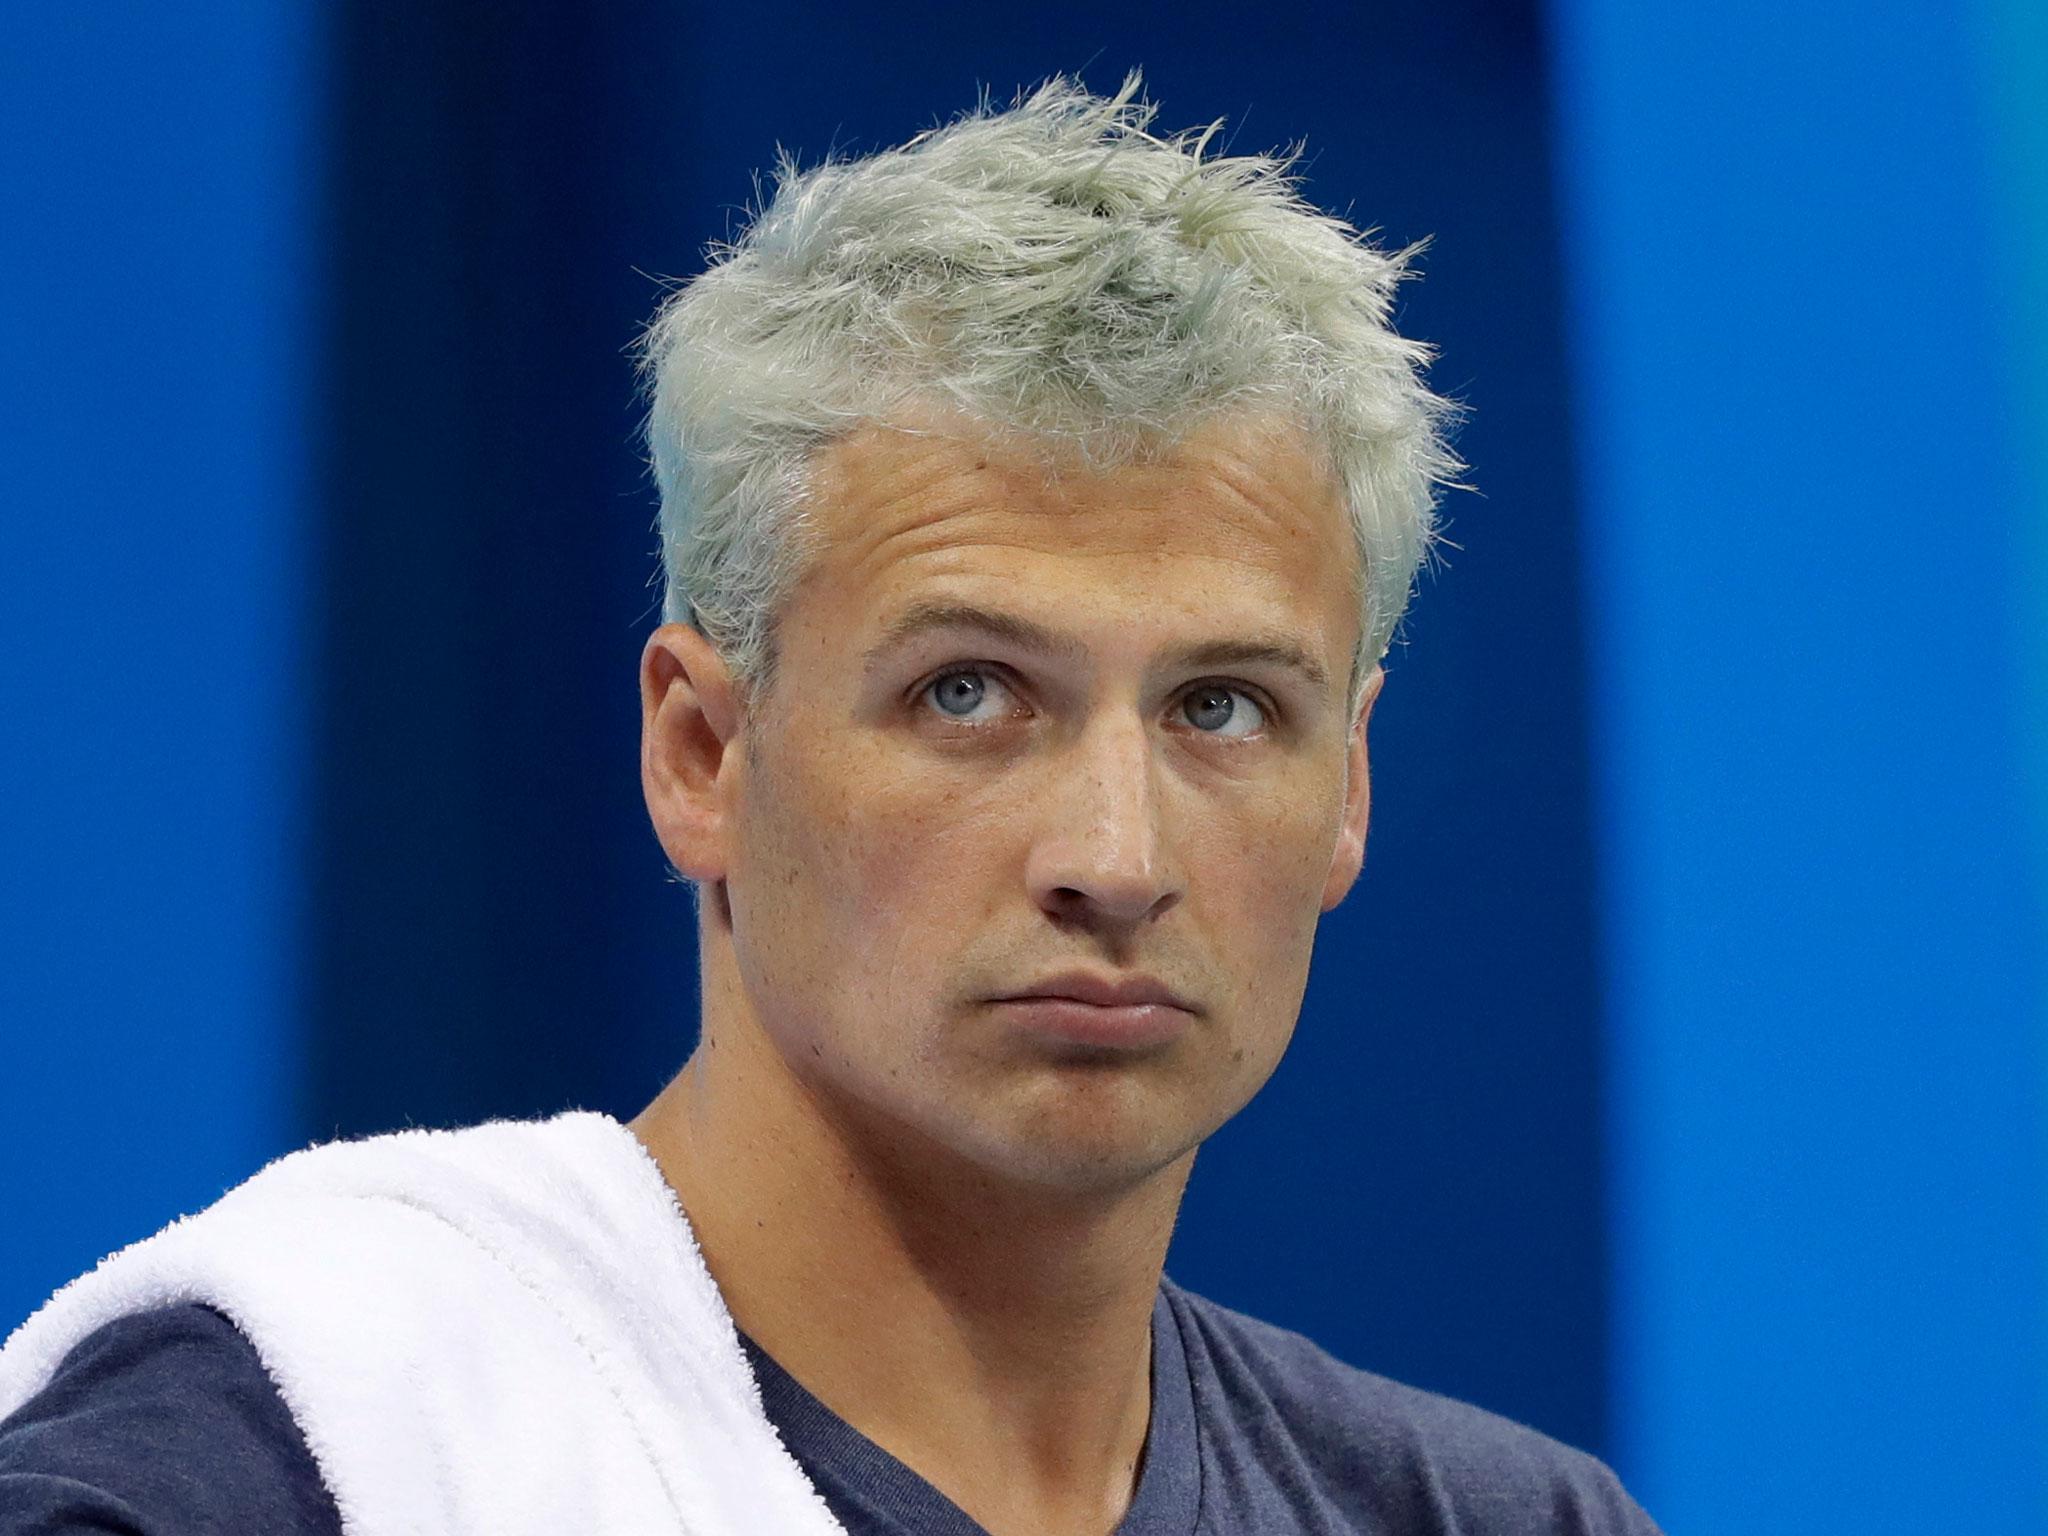 Ryan Lochte has apologised after admitting to giving a false account of an armed robbery in Rio de Janeiro during this year's Olympic Games